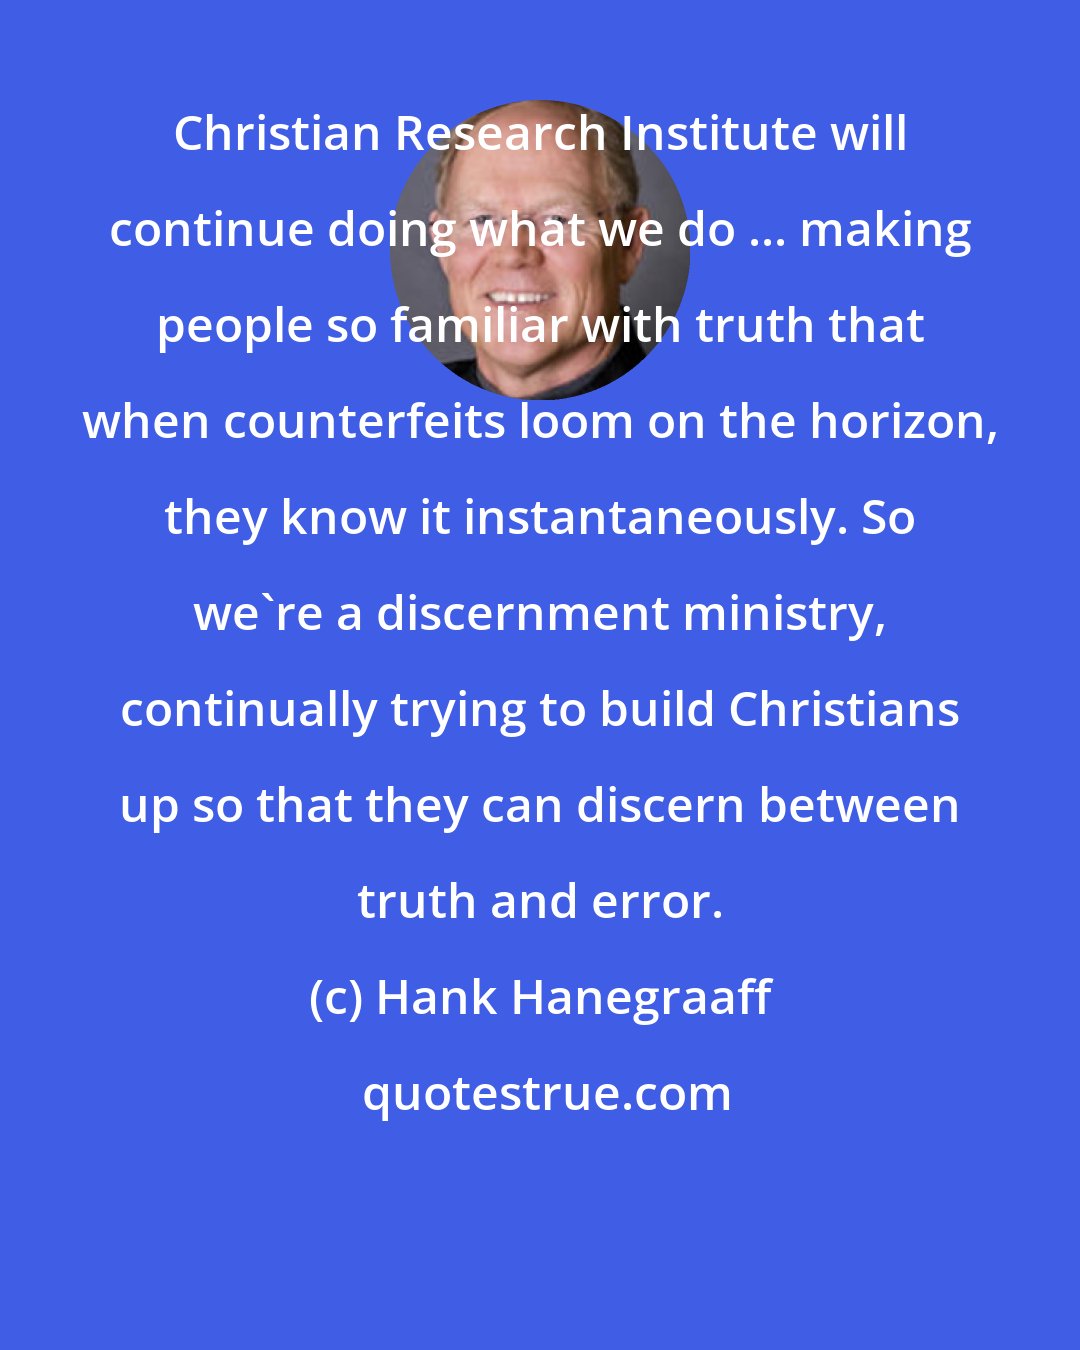 Hank Hanegraaff: Christian Research Institute will continue doing what we do ... making people so familiar with truth that when counterfeits loom on the horizon, they know it instantaneously. So we're a discernment ministry, continually trying to build Christians up so that they can discern between truth and error.